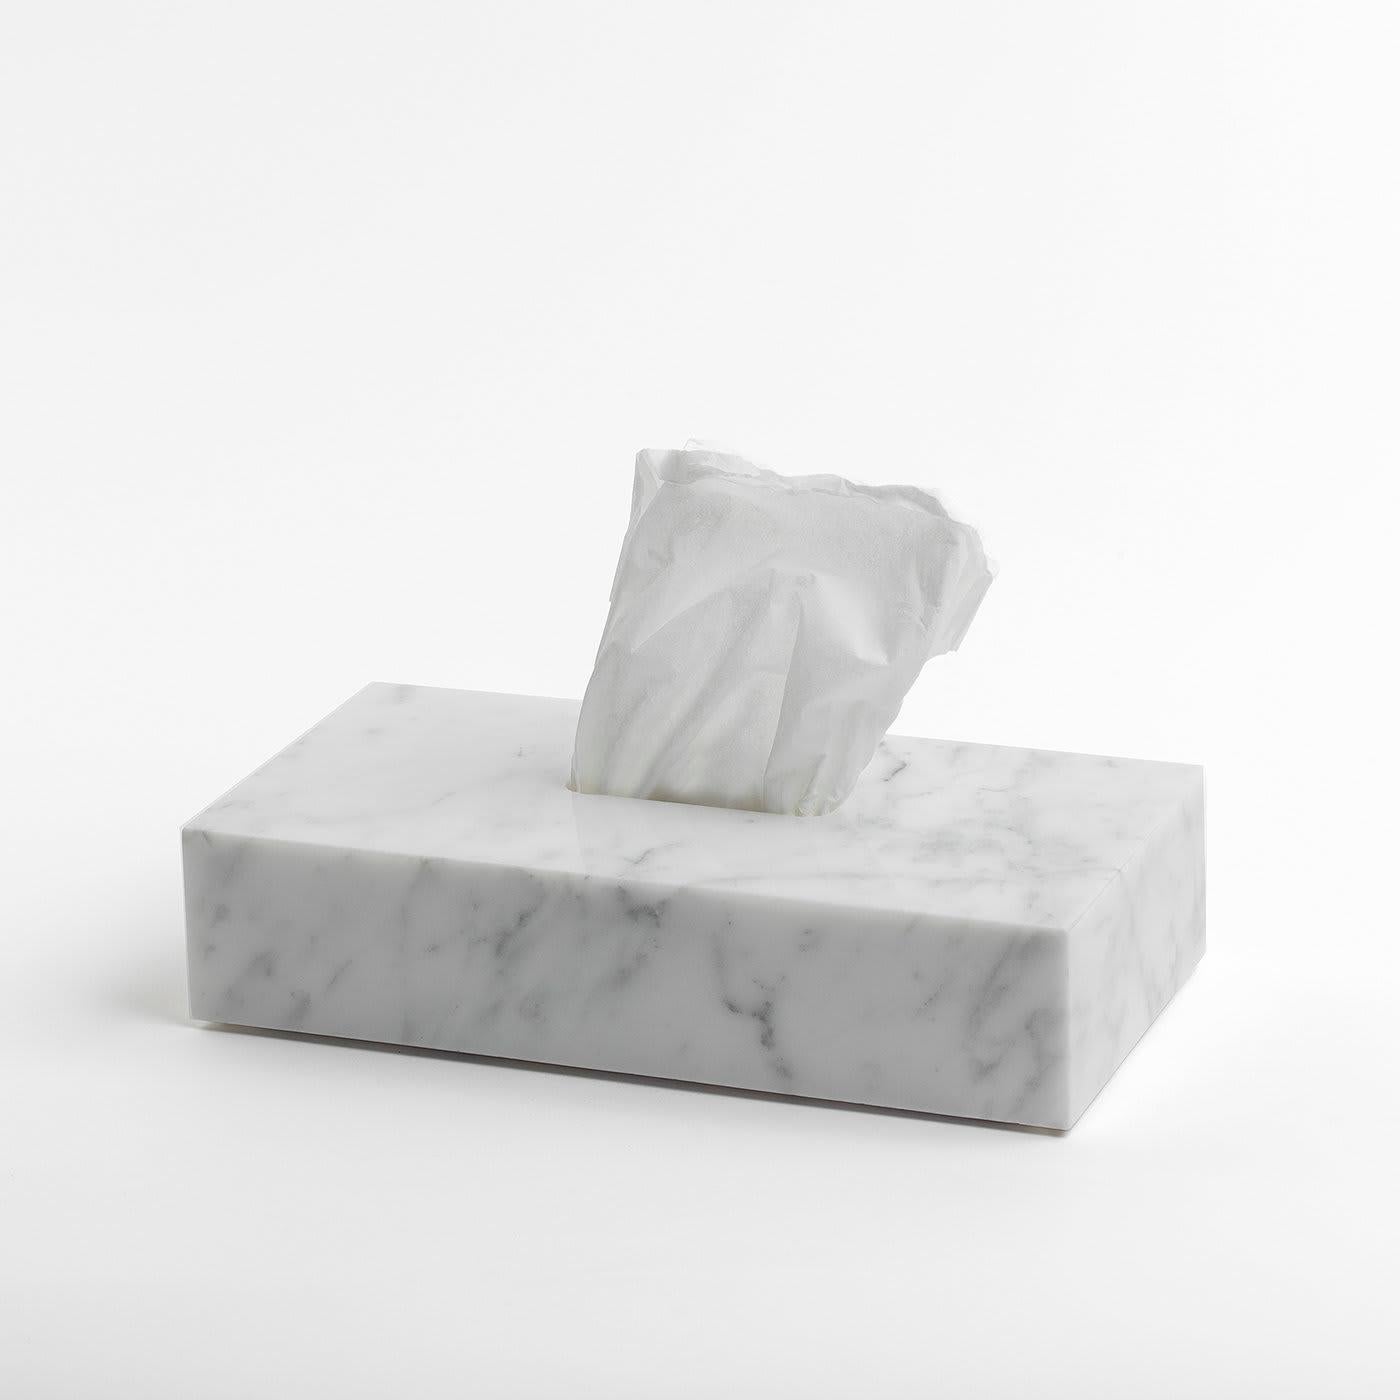 A sophisticated way to have the convenience of a box of tissues displayed anywhere in the home, this white marble box cover will fit over a standard tissue box, creating an elegant accent in a study, bedroom, bathroom, or living room. A slit at the